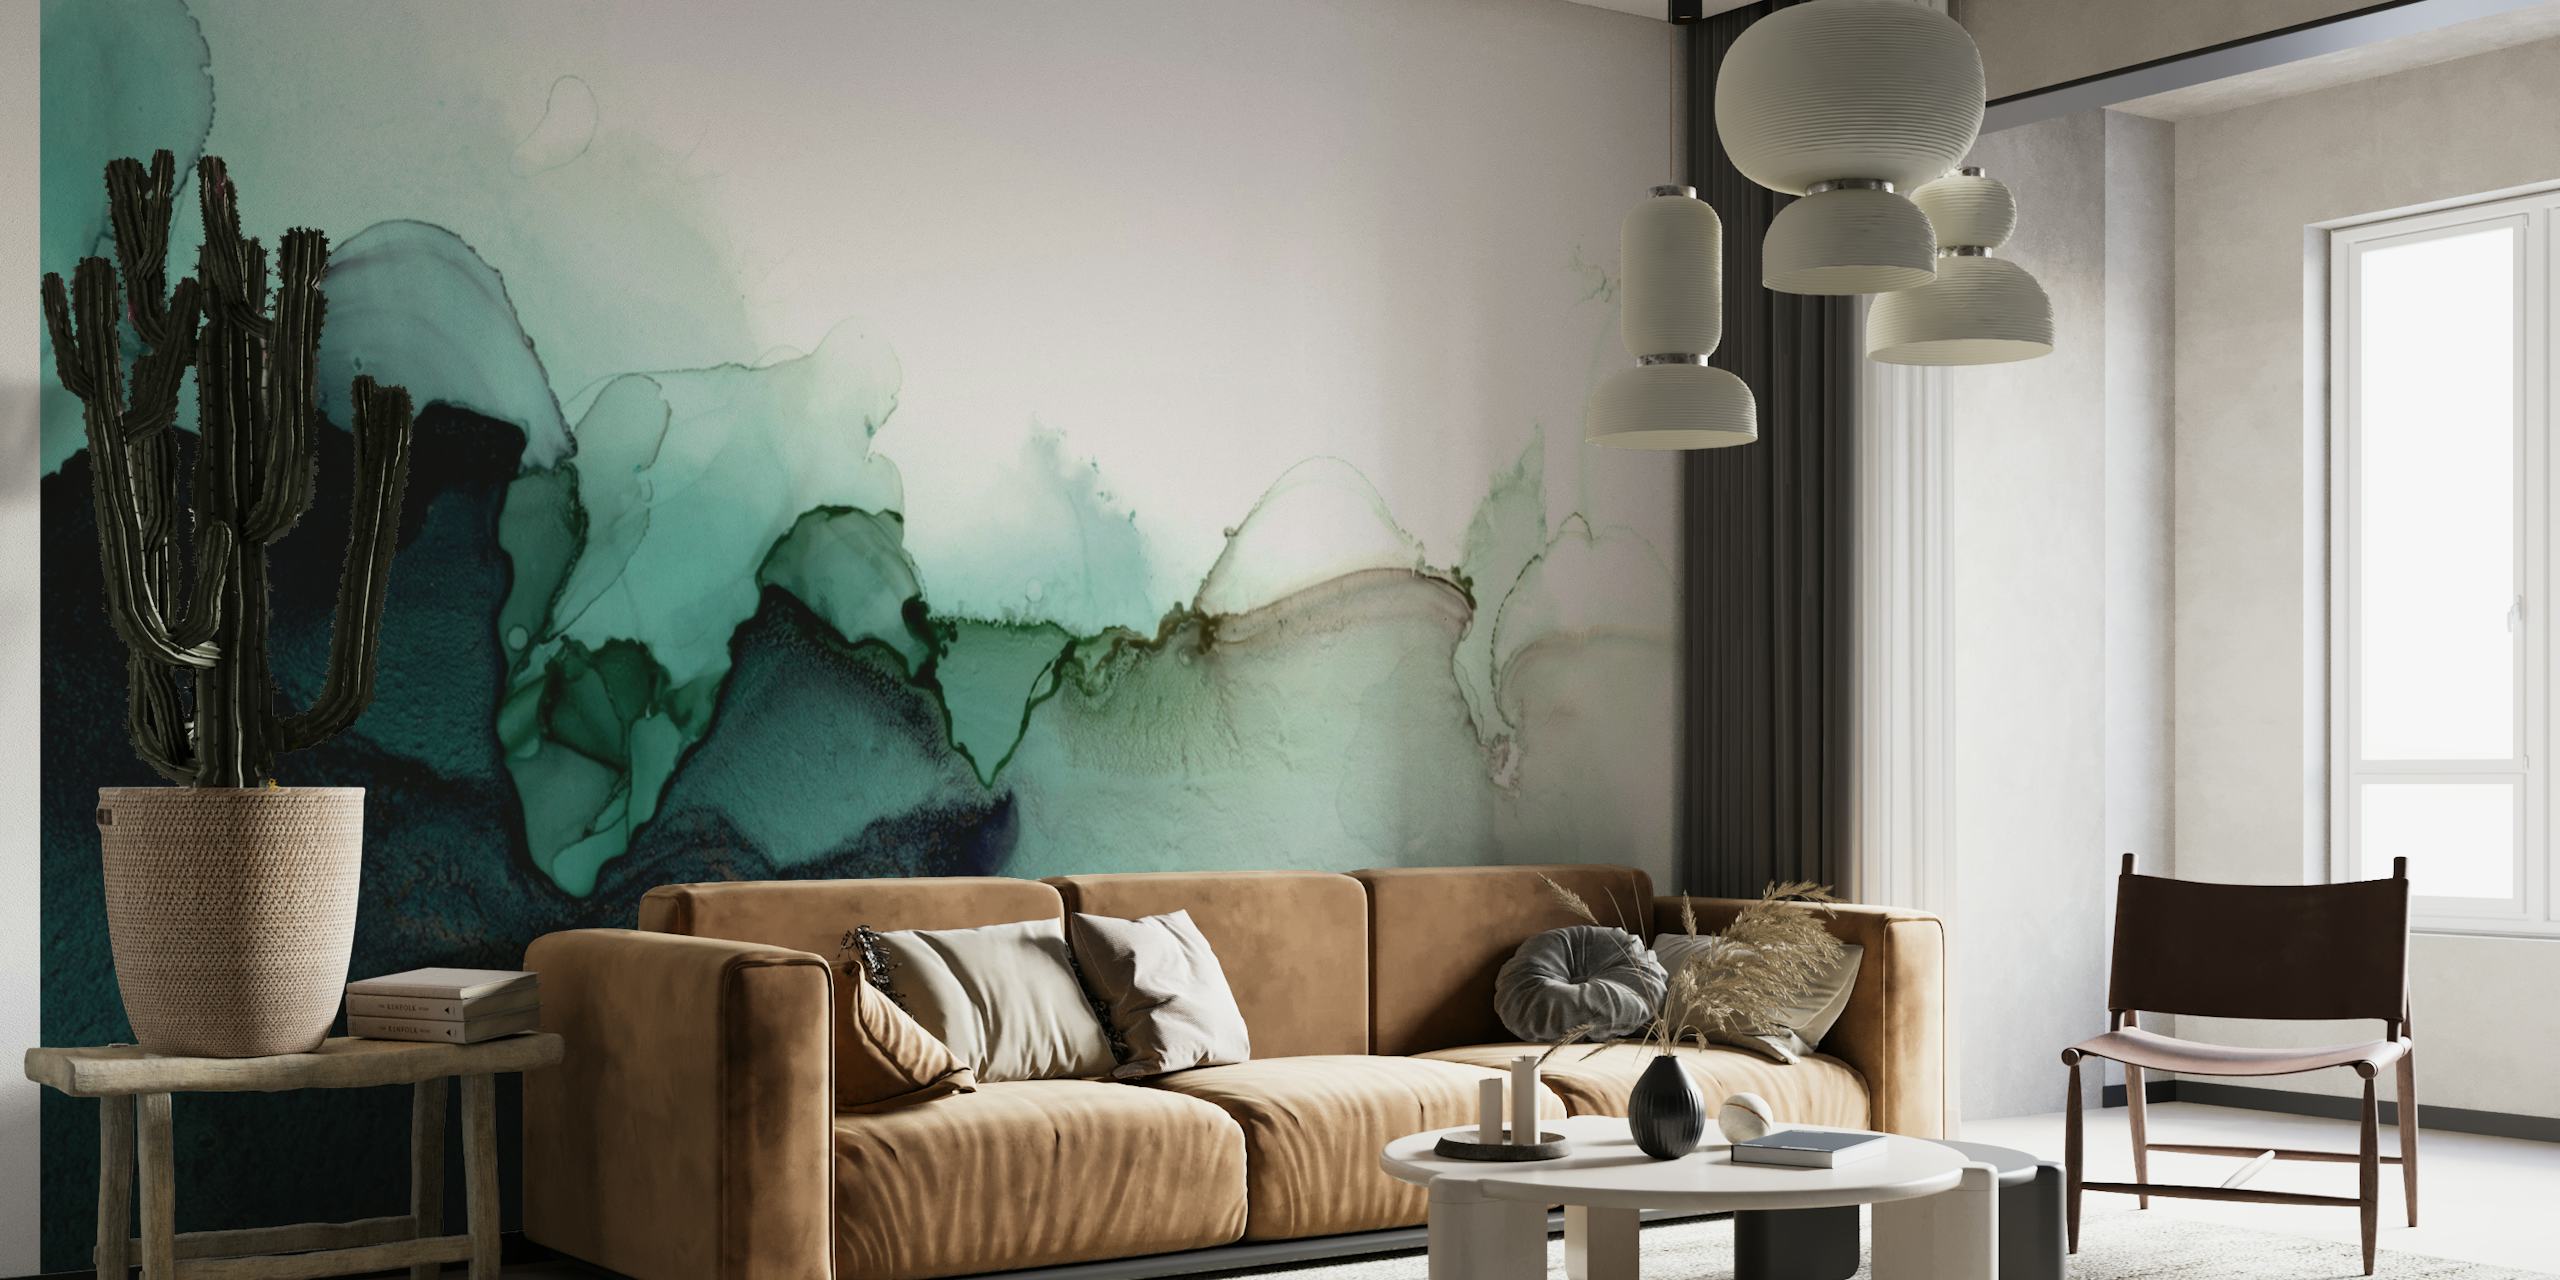 Abstract Green Flow wall mural with emerald and pastel colors blending softly